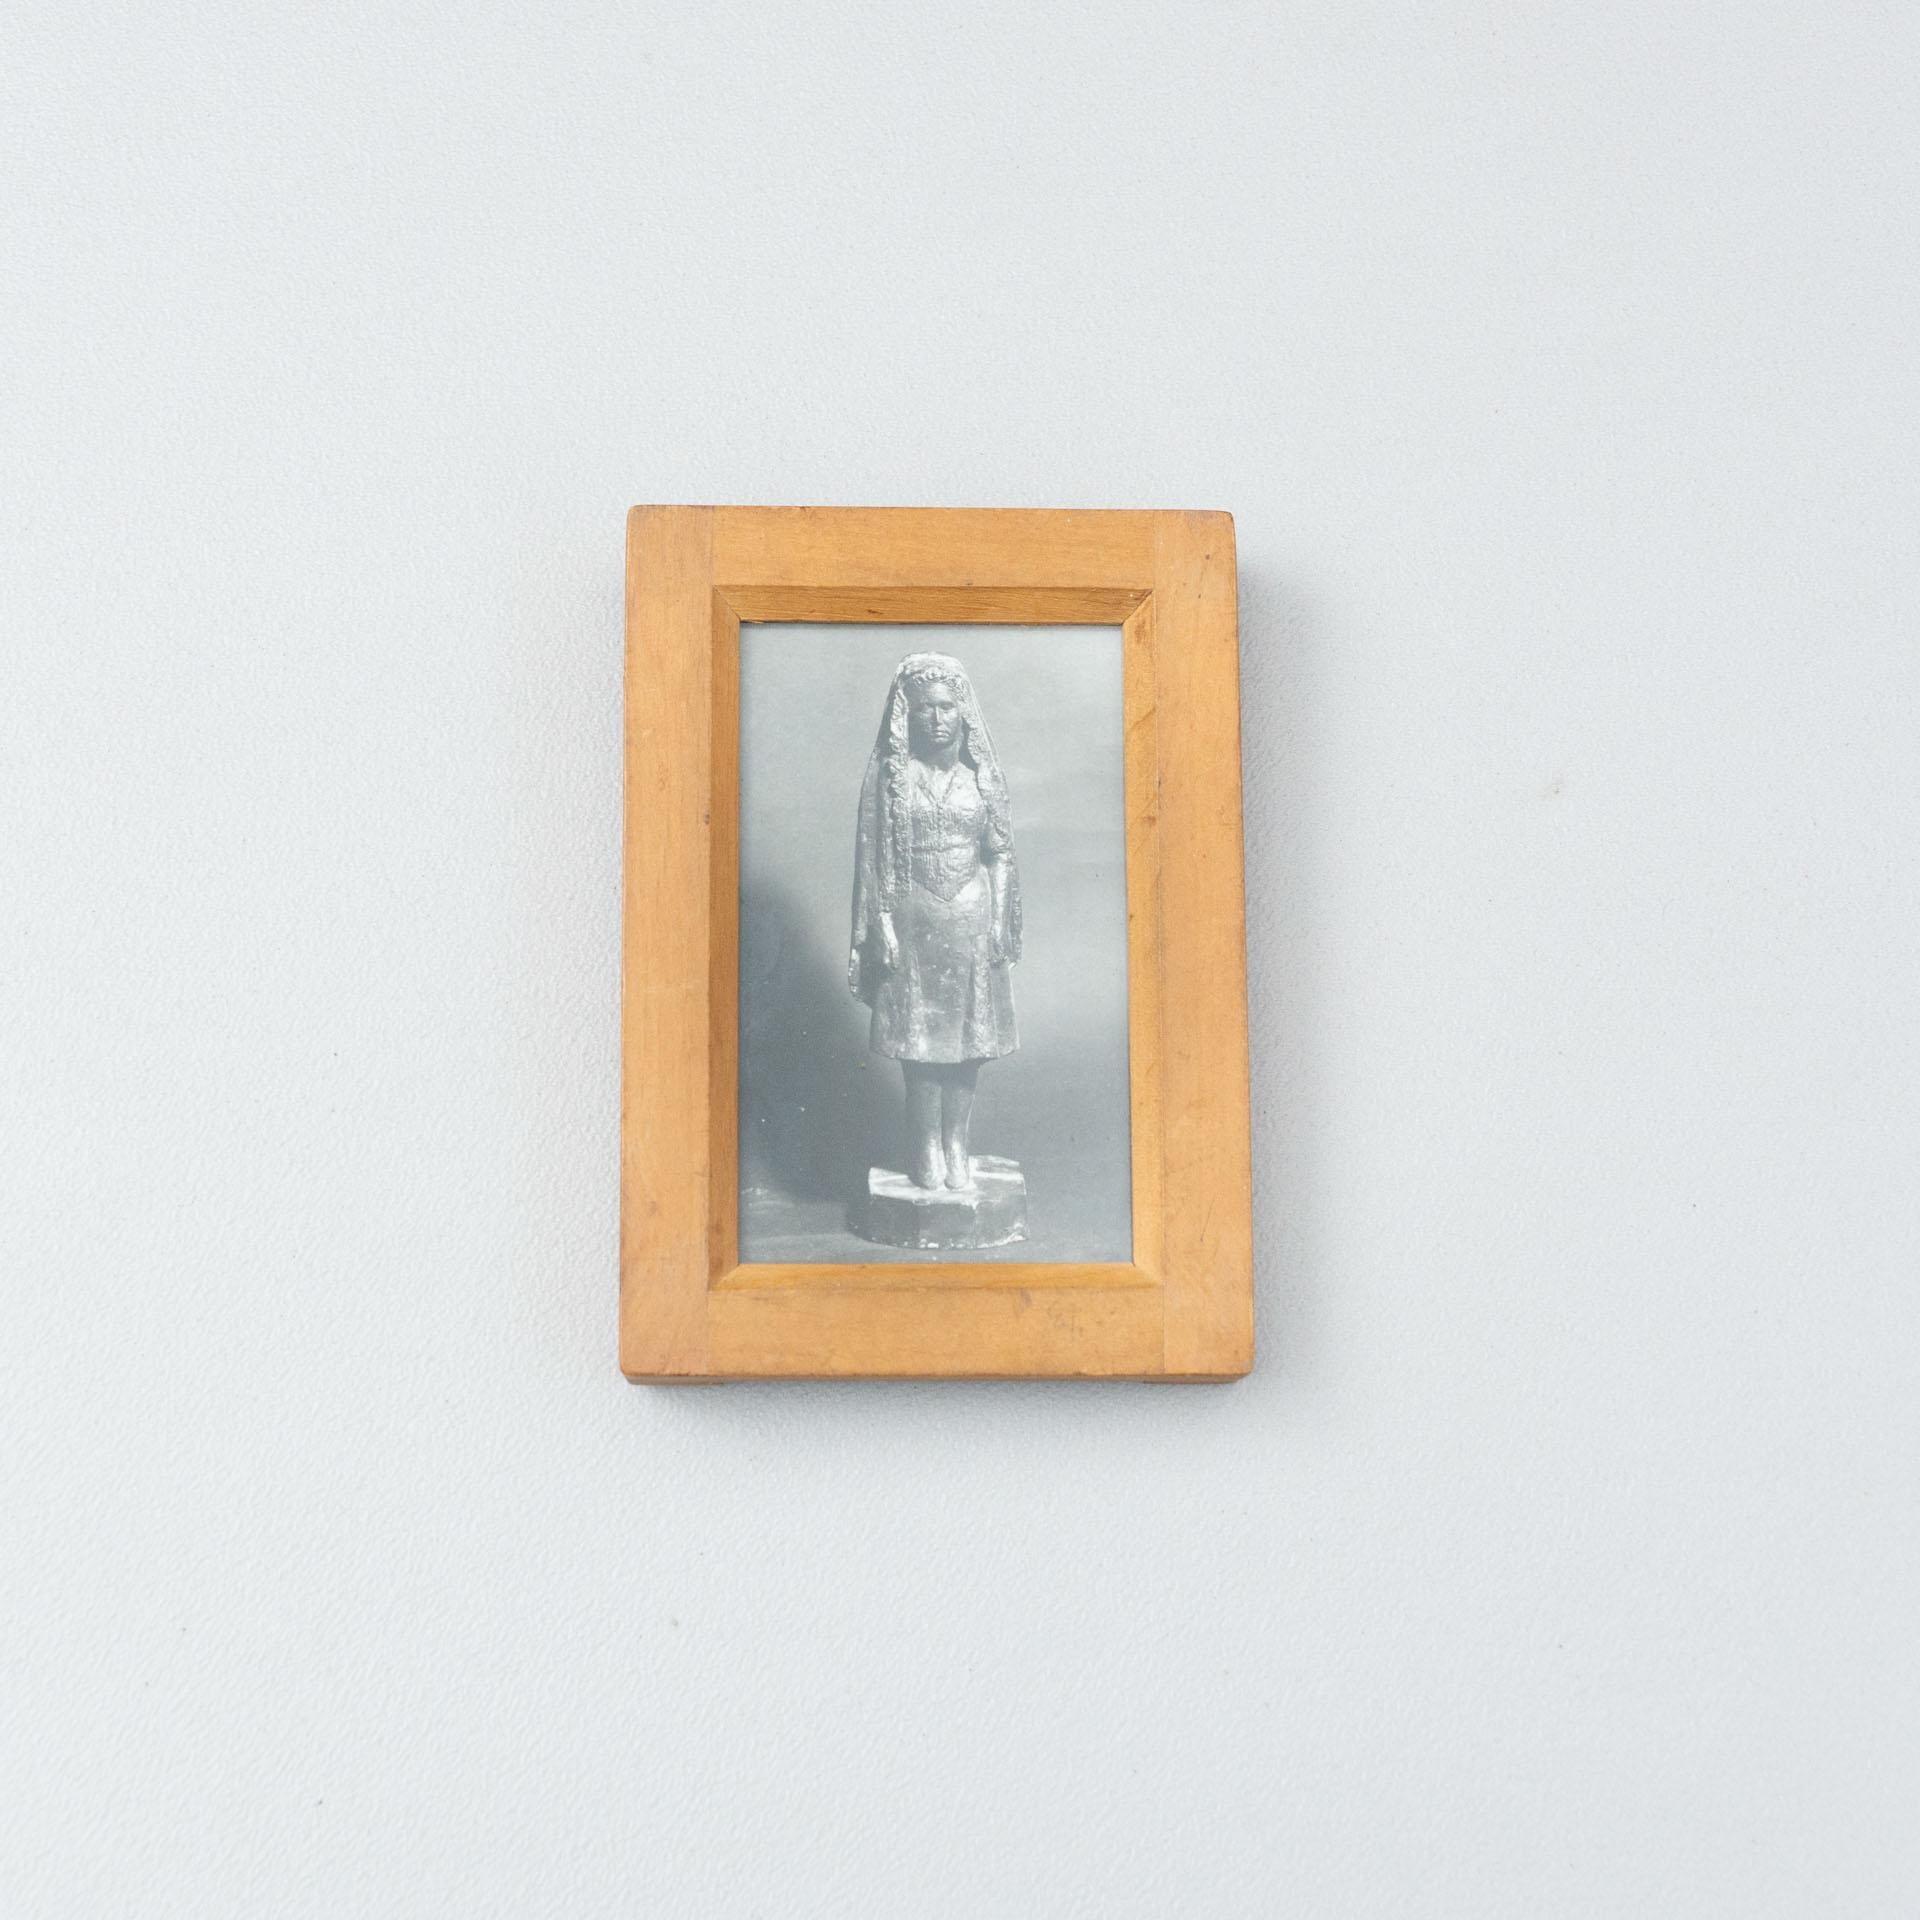 Manolo Hugué archive photography of sculpture.
Printed, circa 1960.
Wood frame included.


Materials:
Gelatin silver bromide print

Dimensions:
D 2 cm x W 10.6 cm x H 15 cm

We offer free worldwide shipping for this piece.